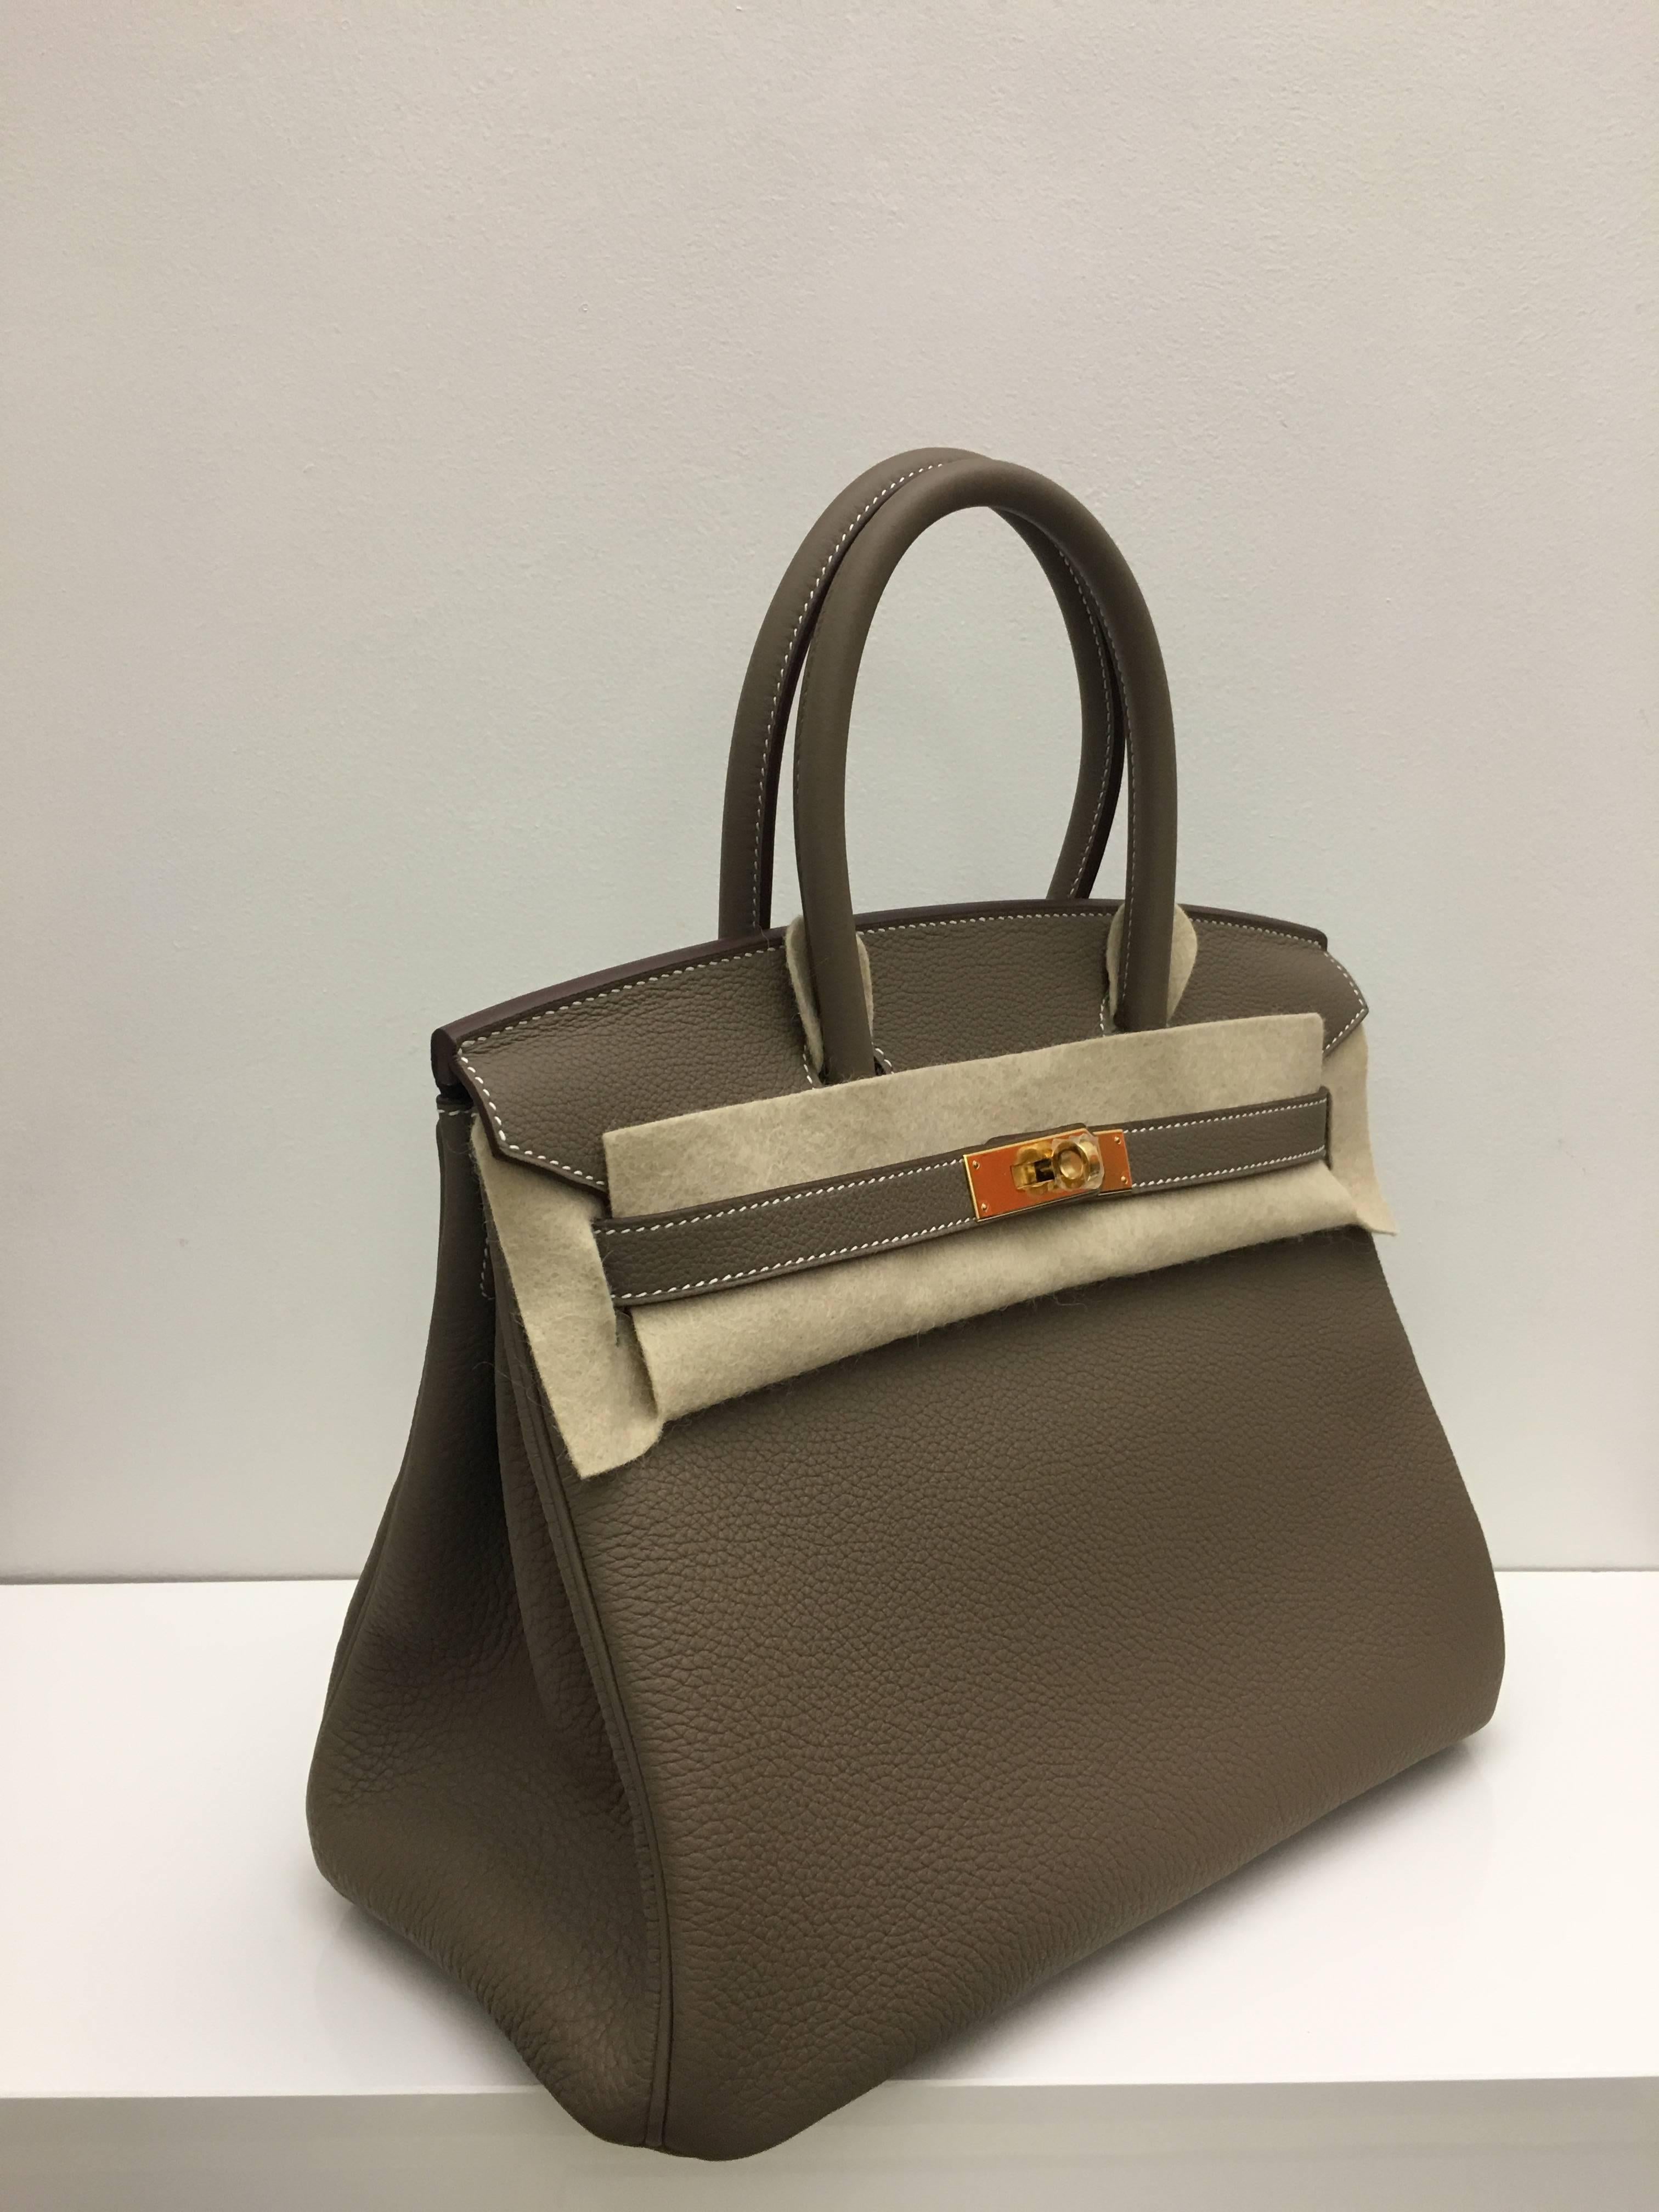 Hermes 
Birkin Size 30
Togo Leather 
Colour Etoupe
Gold Hardware 
store fresh, comes with receipt and full set (dust bag, box...) 
Hydeparkfashion specializes in sourcing and delivering authentic luxury handbags, mainly Hermes, to client